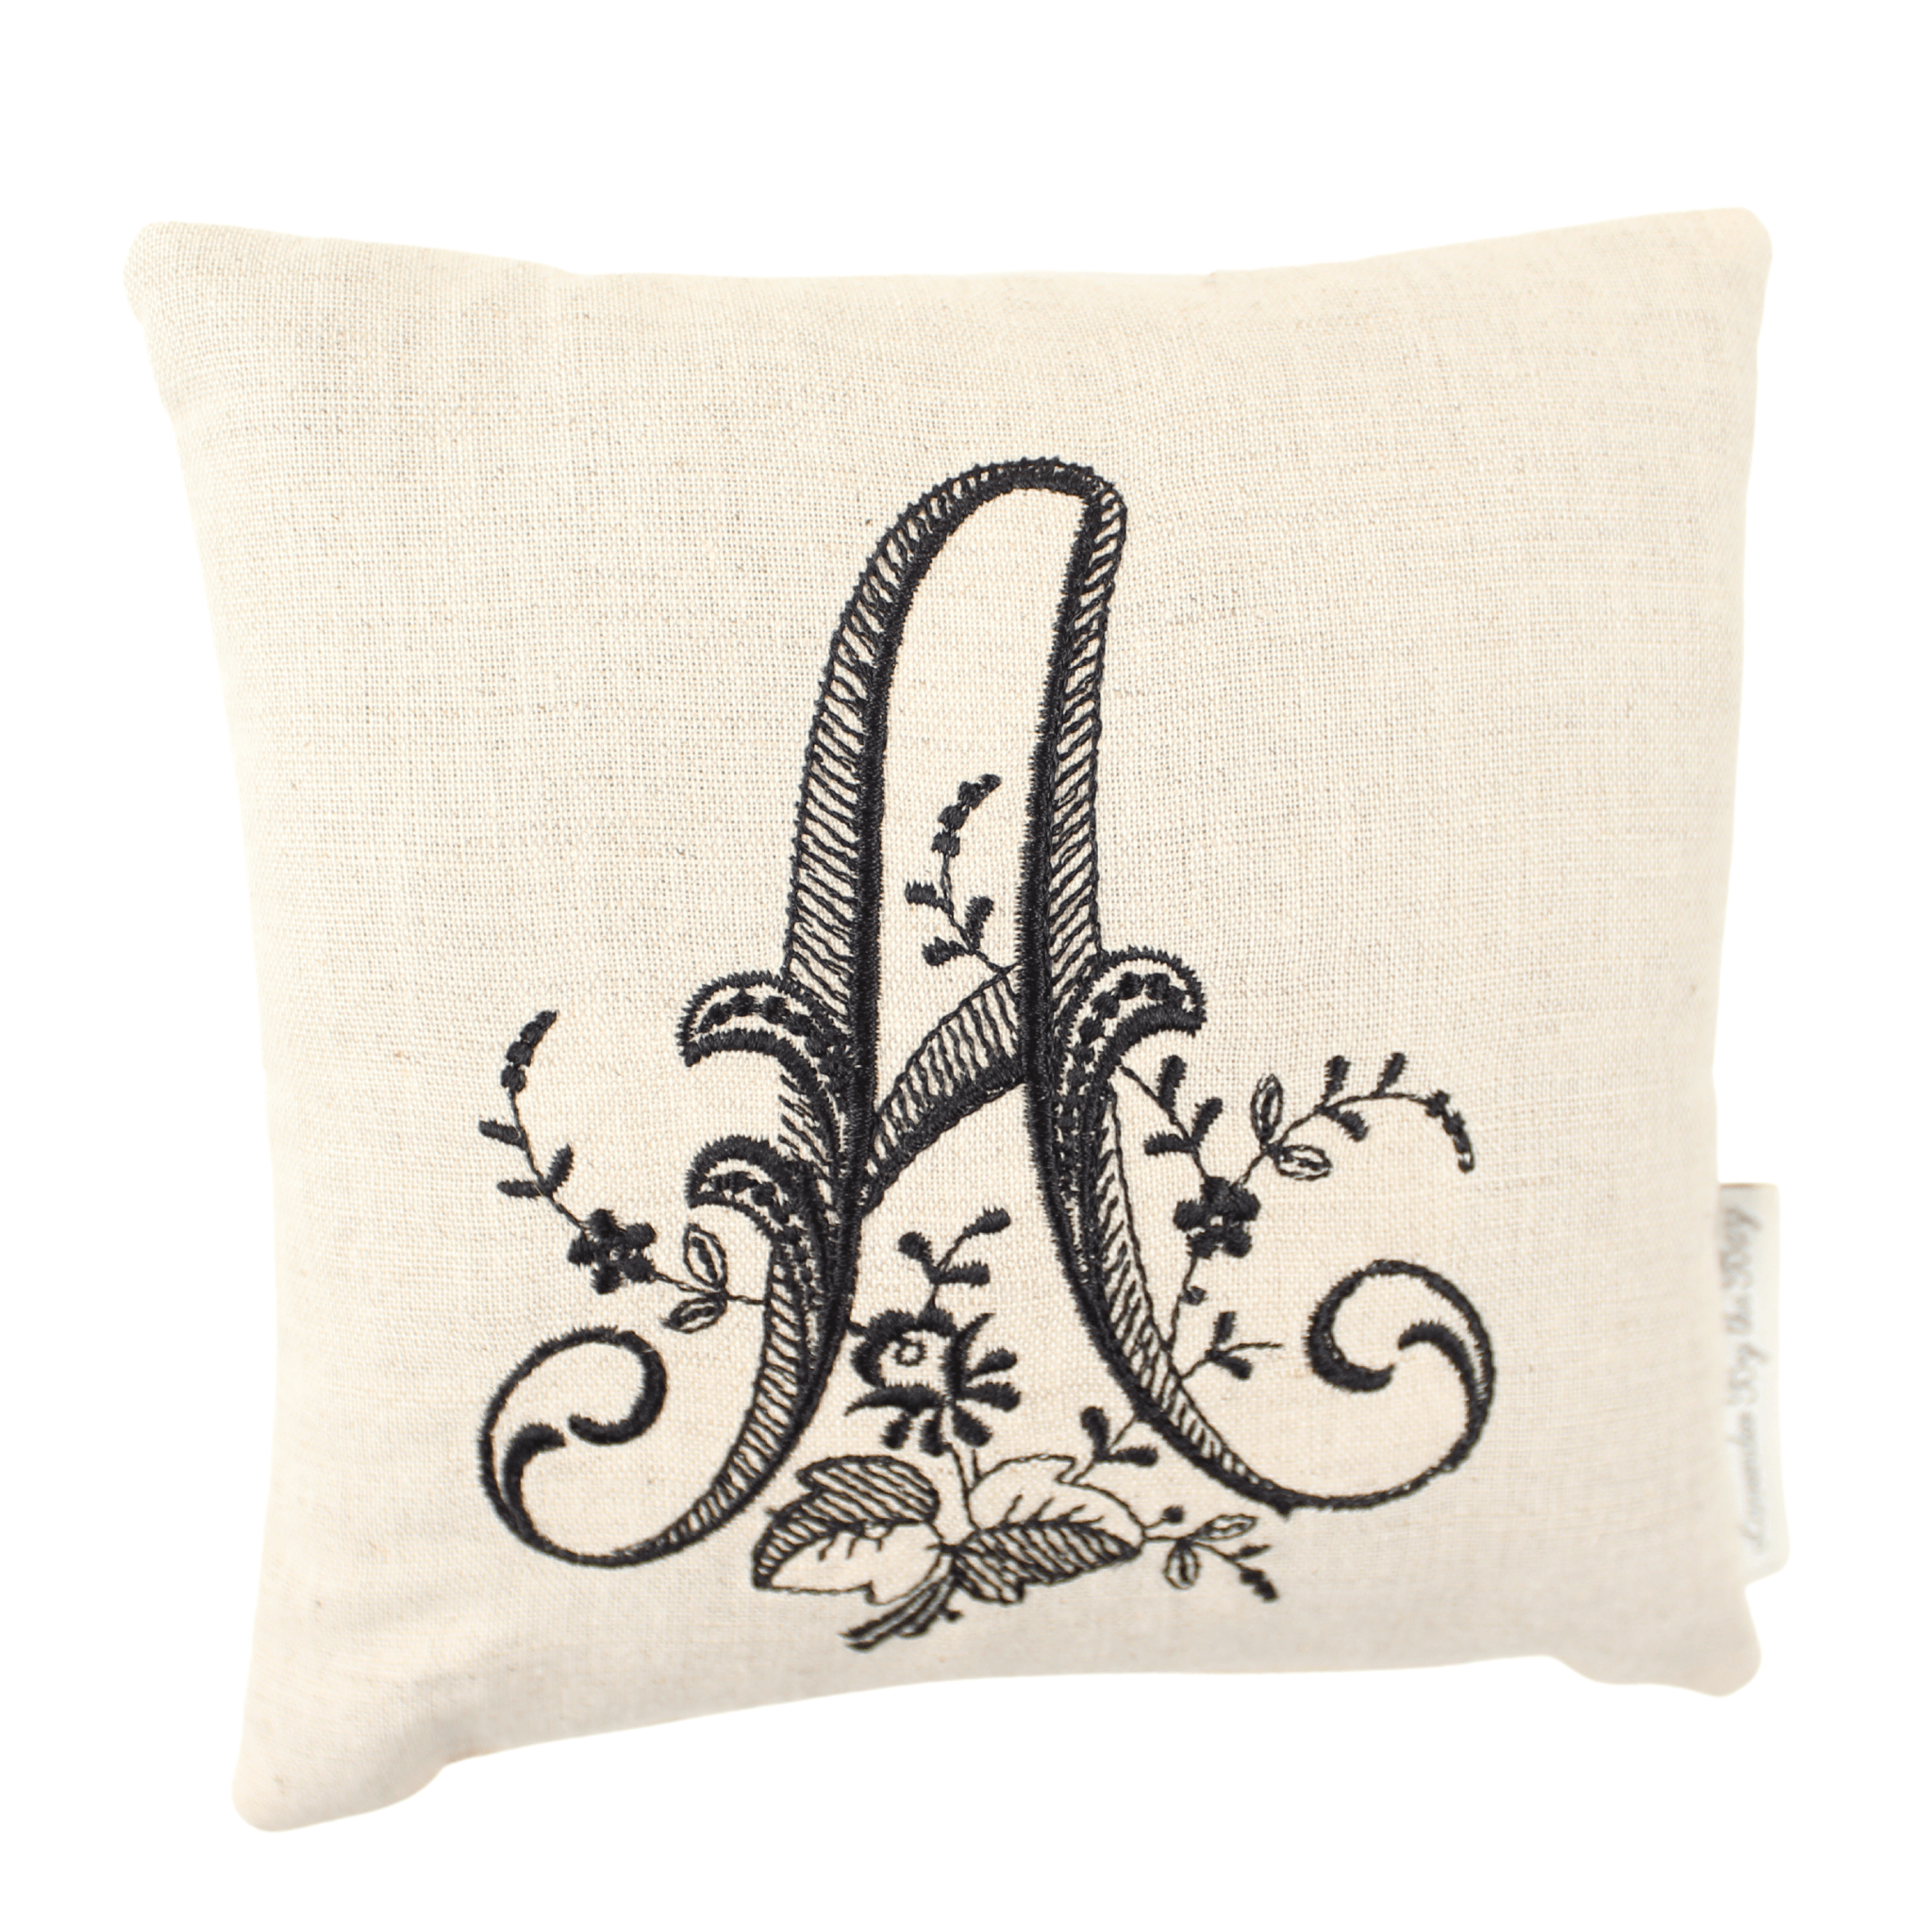 Monogrammed Pillow - Lavender by the Bay Sachet – Lavender By The Bay